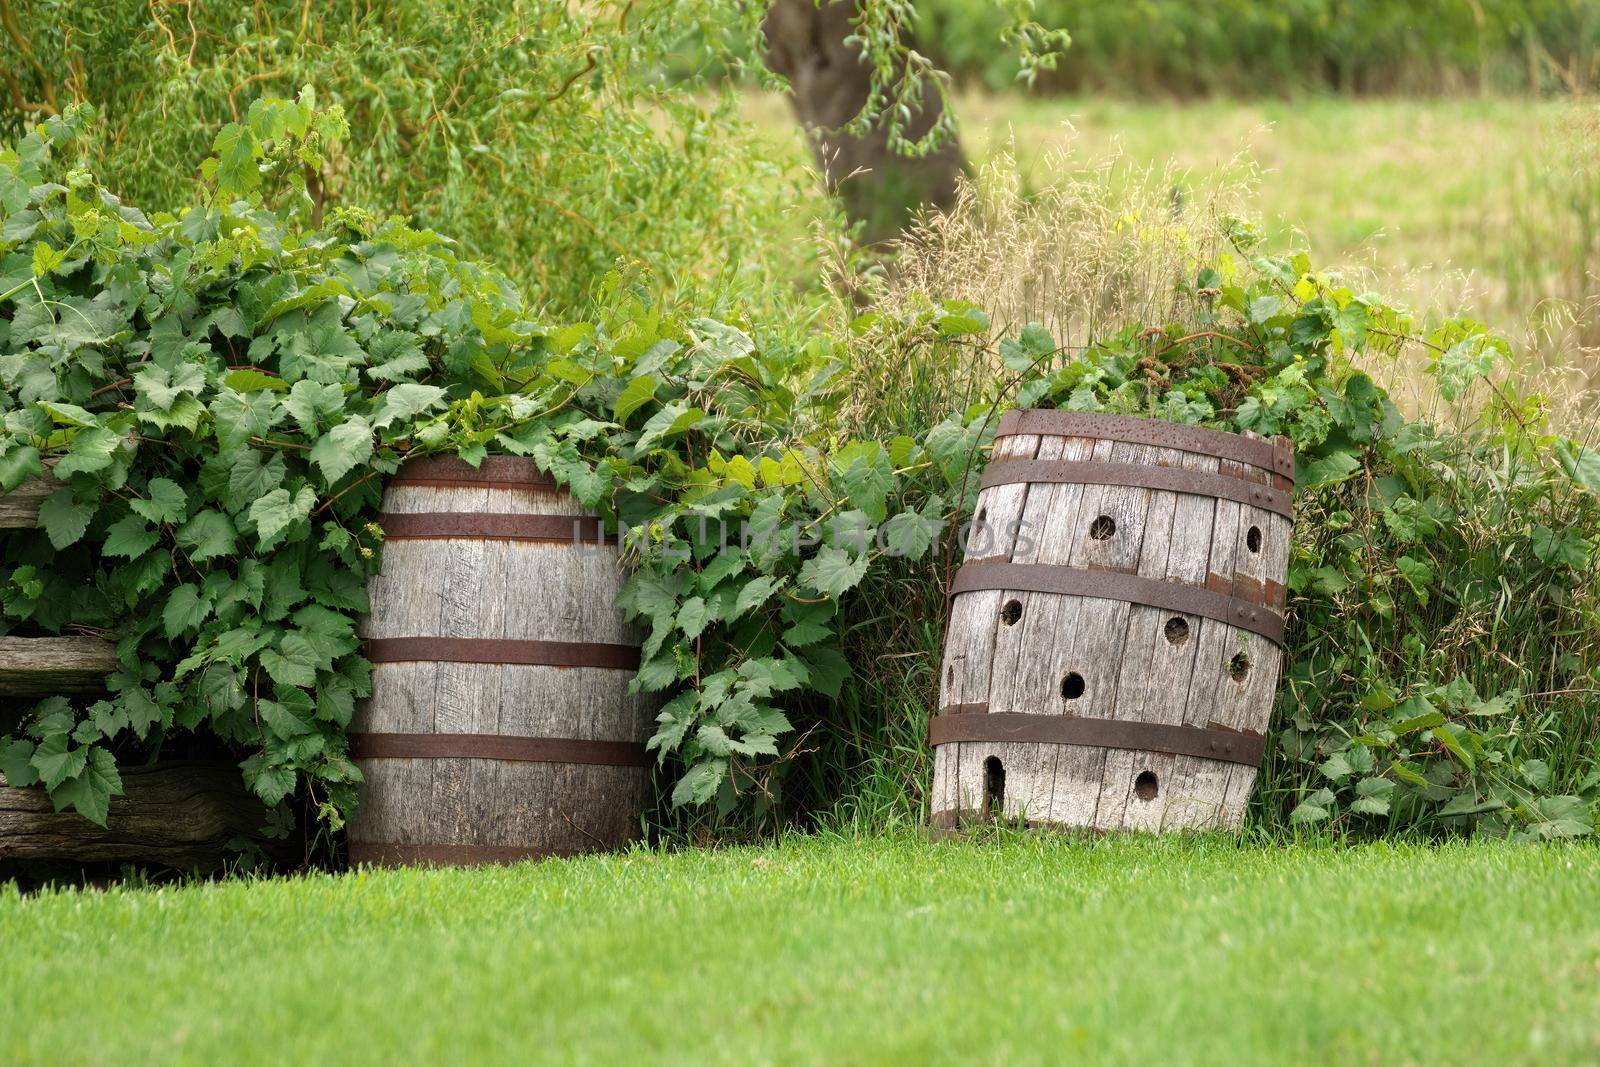 Wooden Barrels in a Garden have Many Uses including Storing Rain Water or as Planters or Rustic Decoration. High quality photo